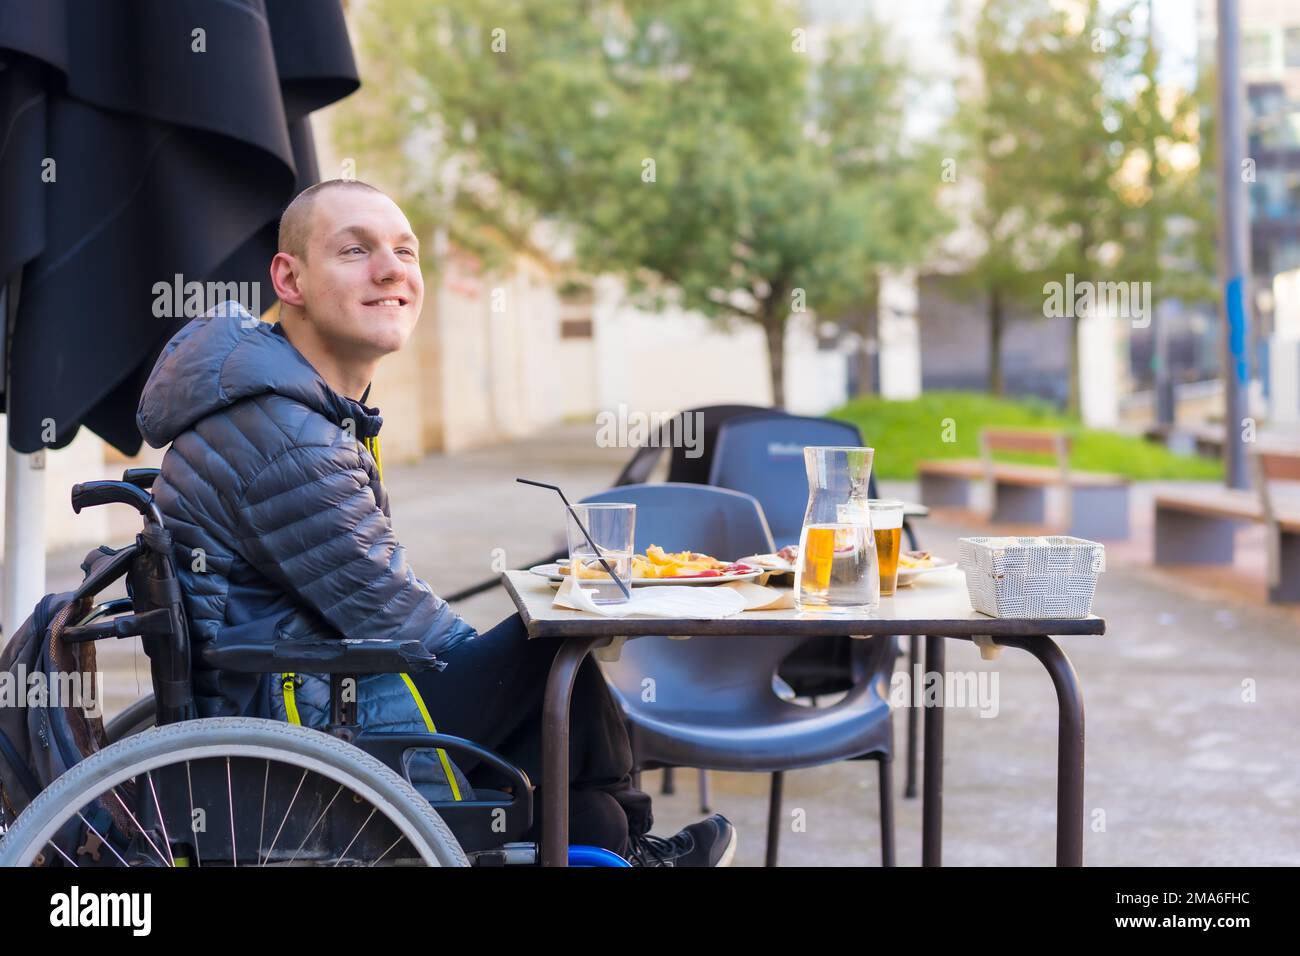 A disabled person eating on the terrace of a restaurant Stock Photo